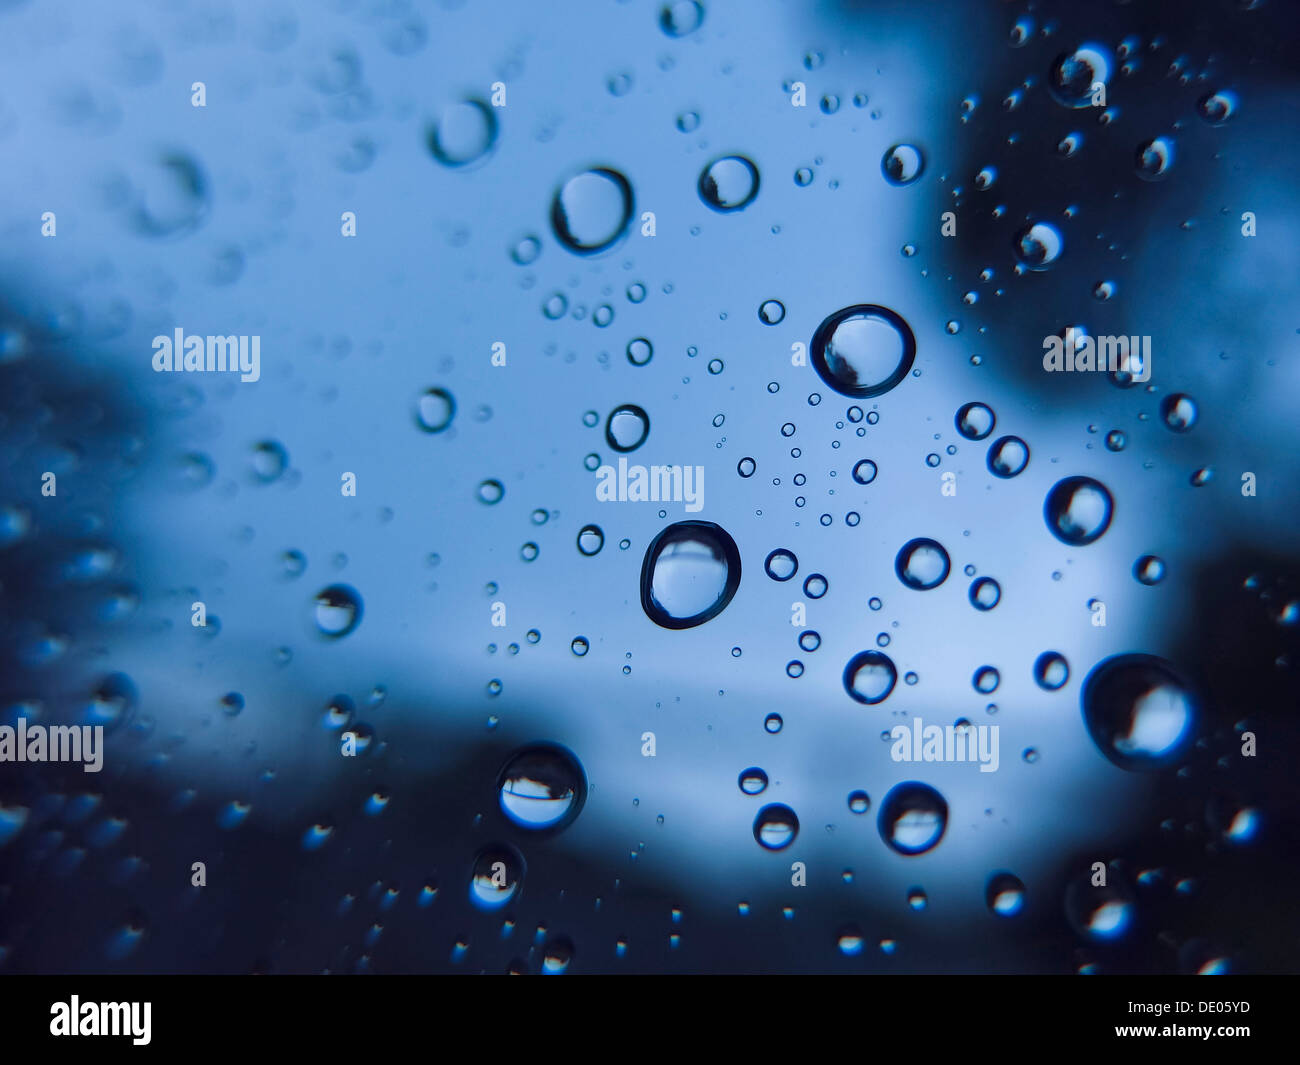 Rain drop on the glass, abstract view background Stock Photo